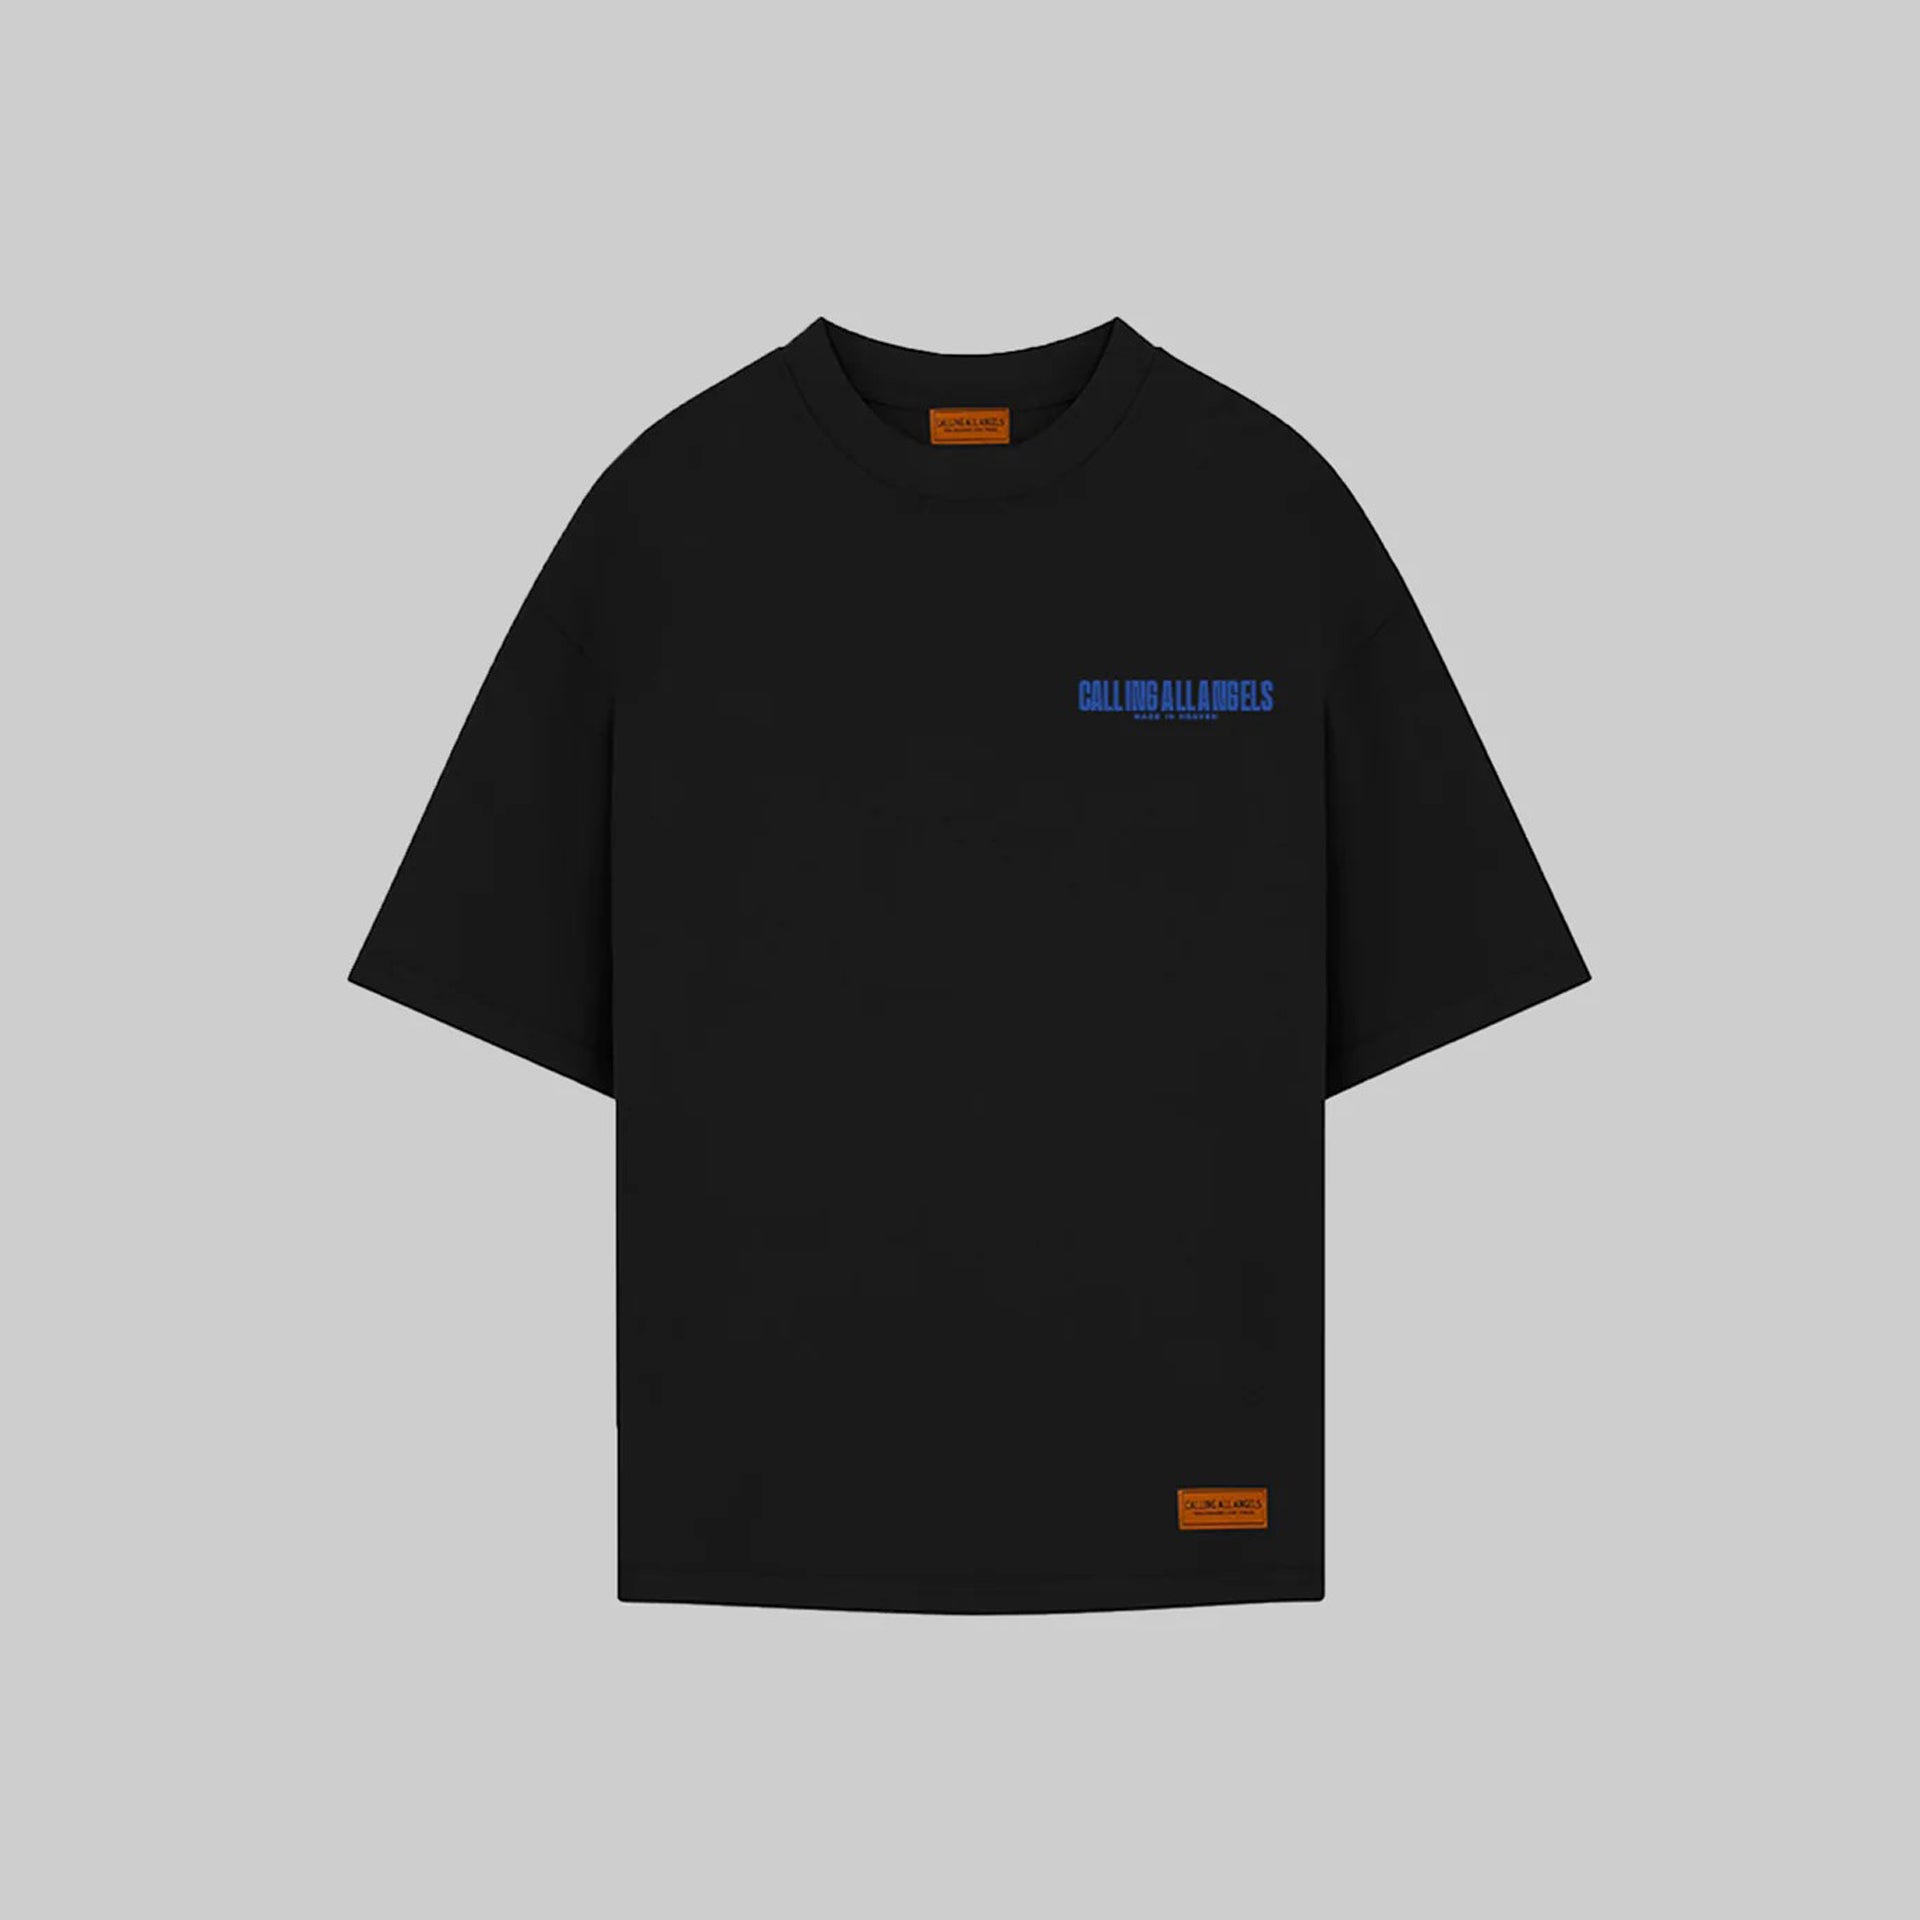 Black Logo T-shirt From Calling All Angels